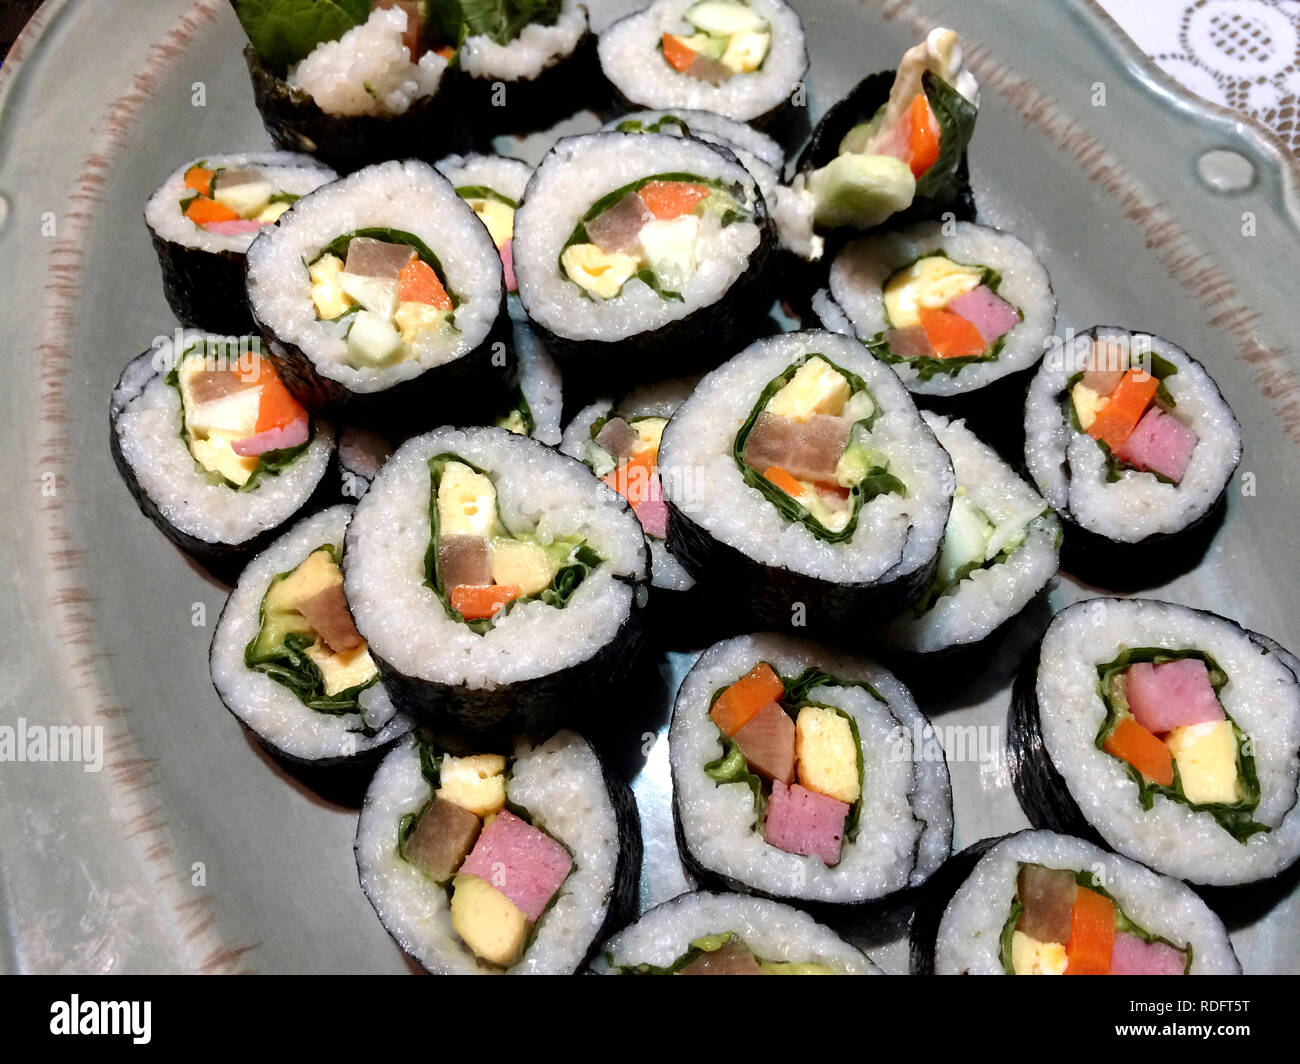 Gimbap on plate (traditional Korean food, rice rolled in seaweed) Stock Photo